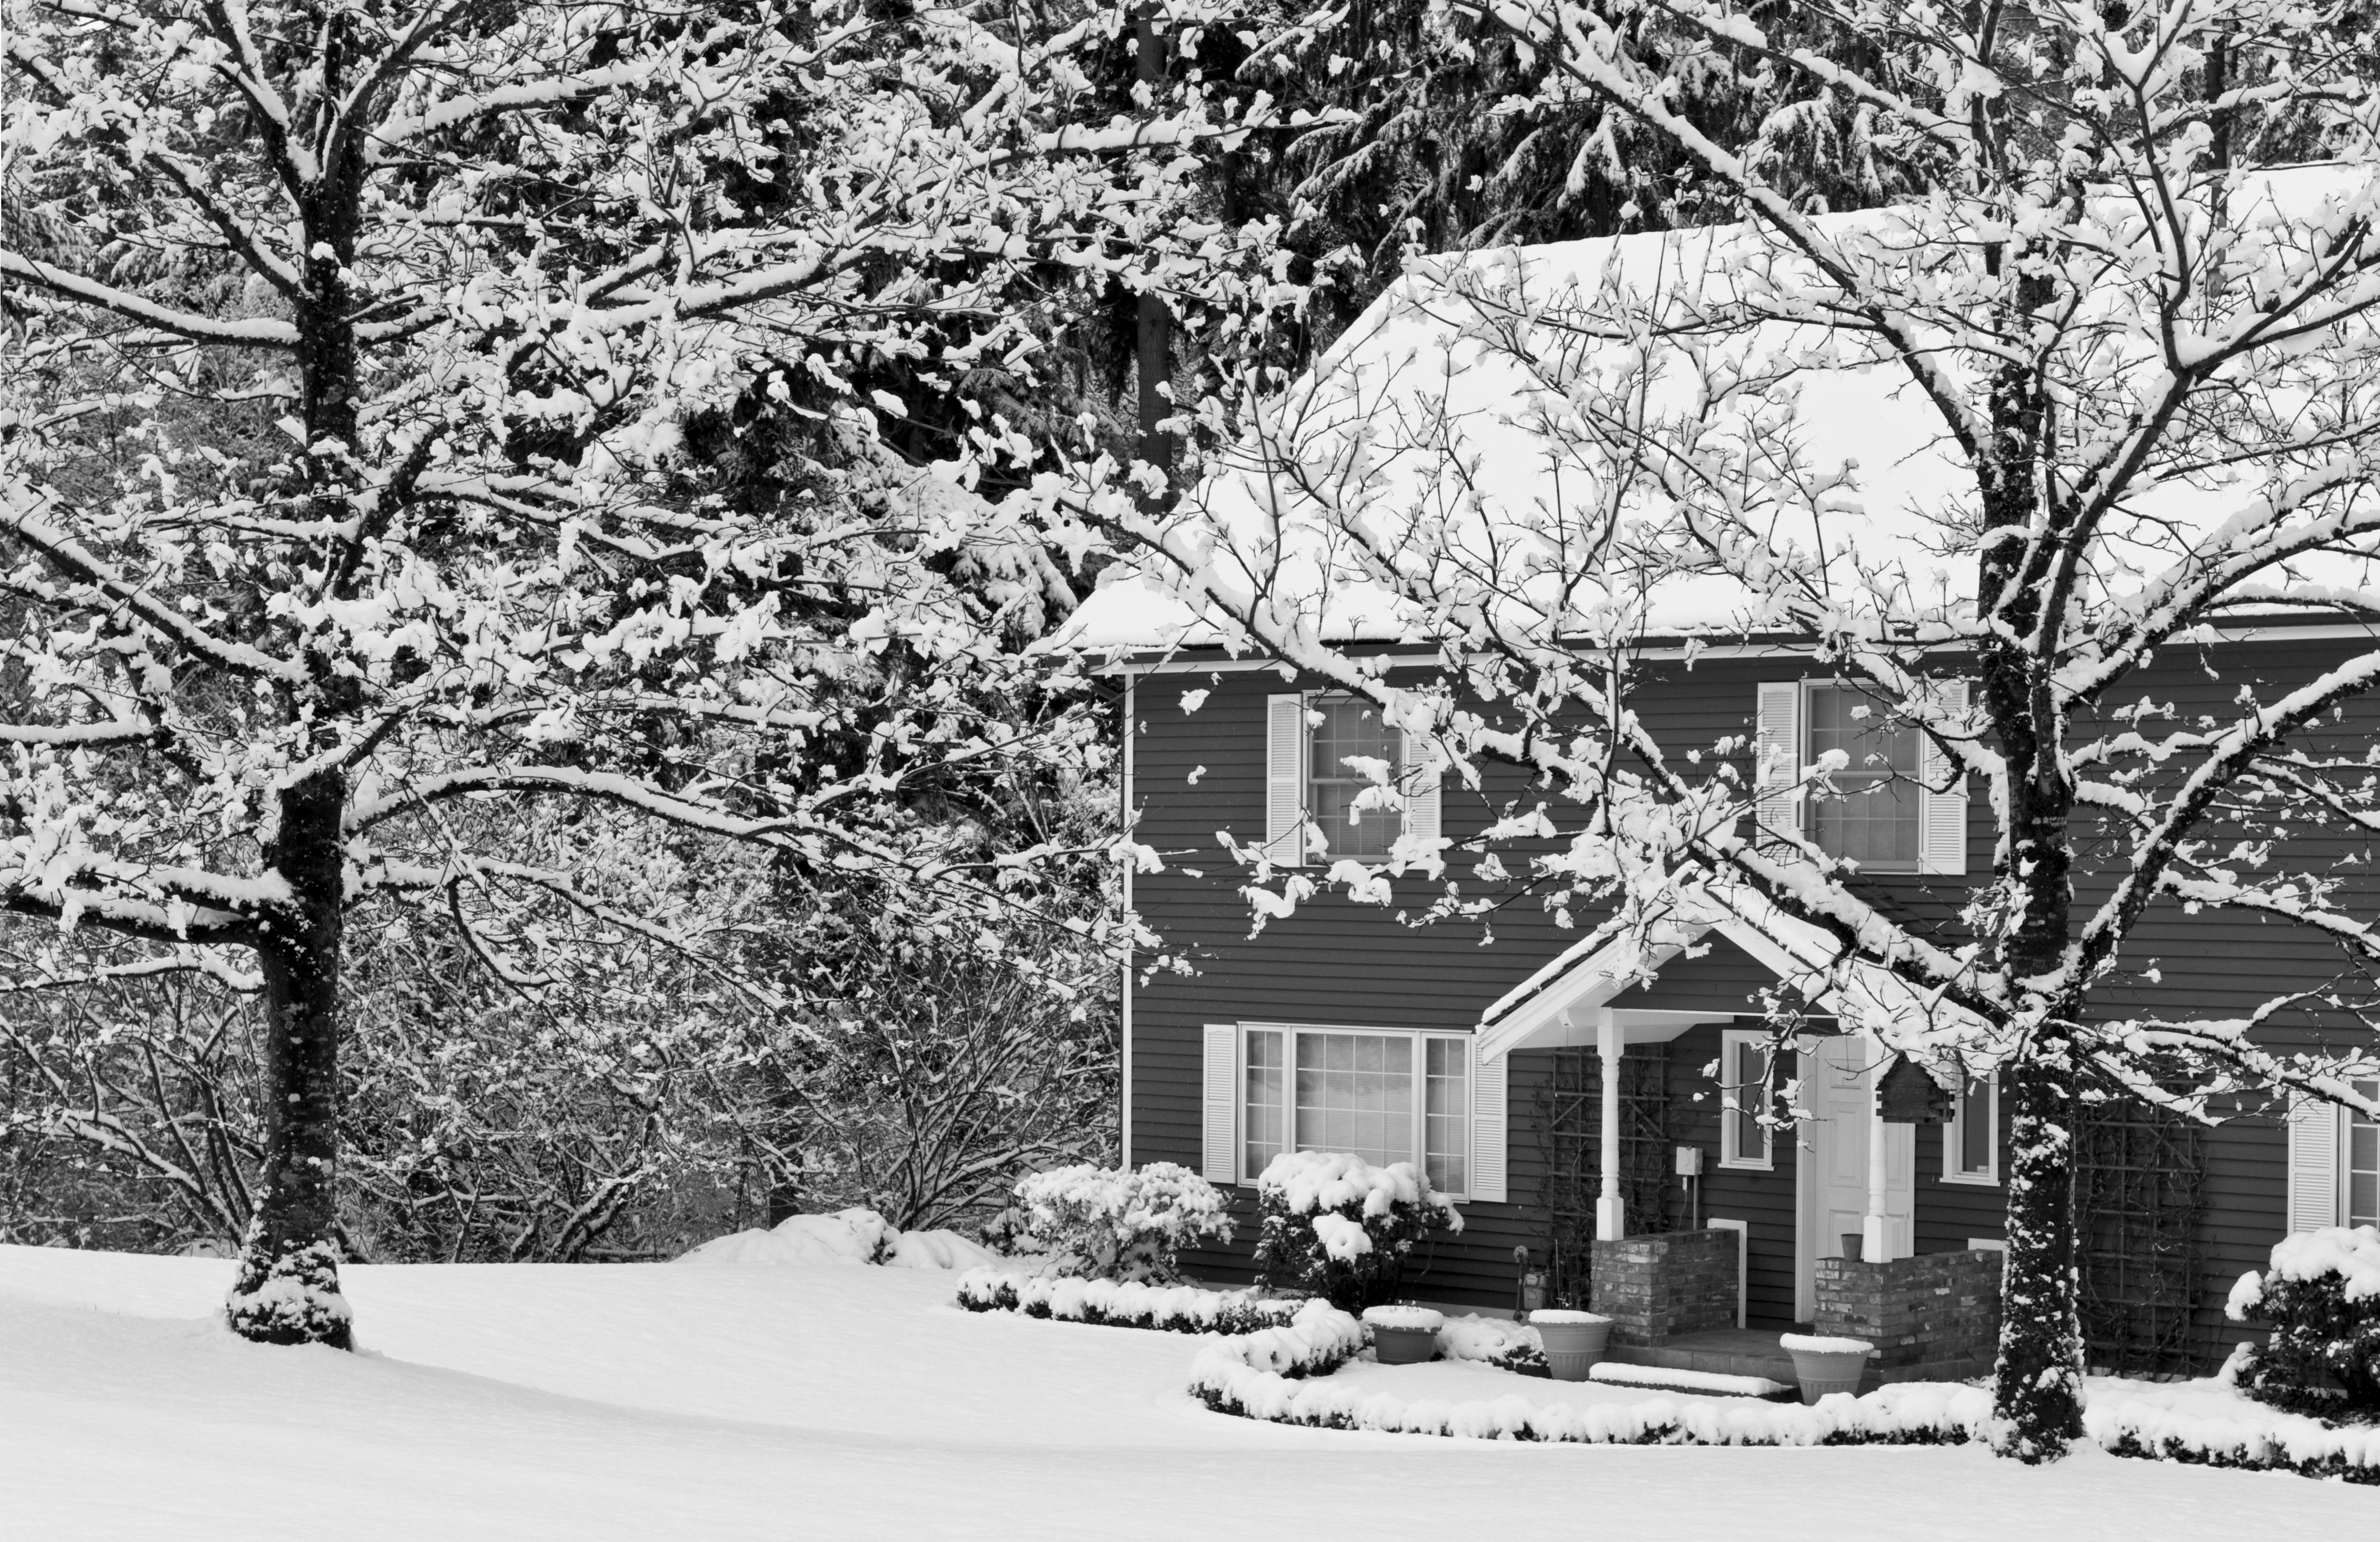 Tips to winterize your home